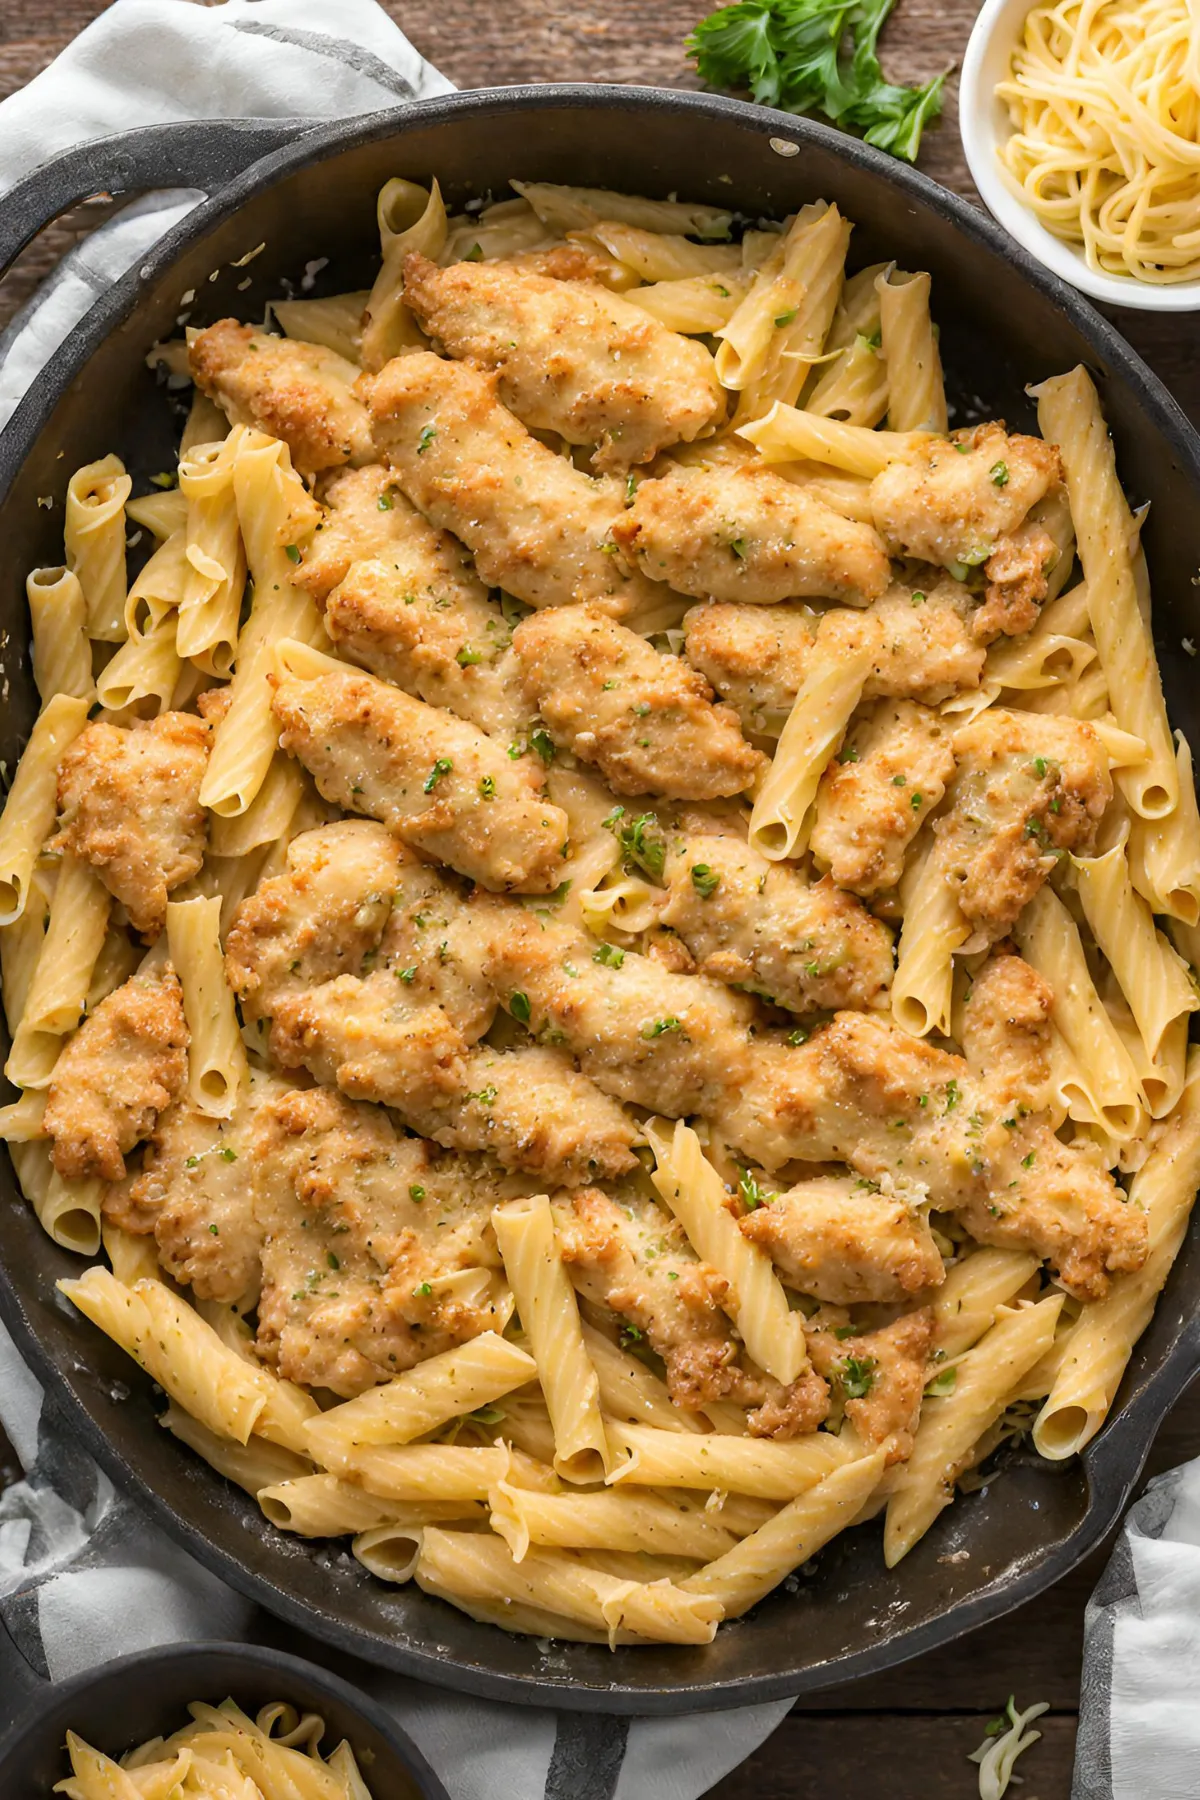 Why You'll Love This Chicken Pasta Recipe